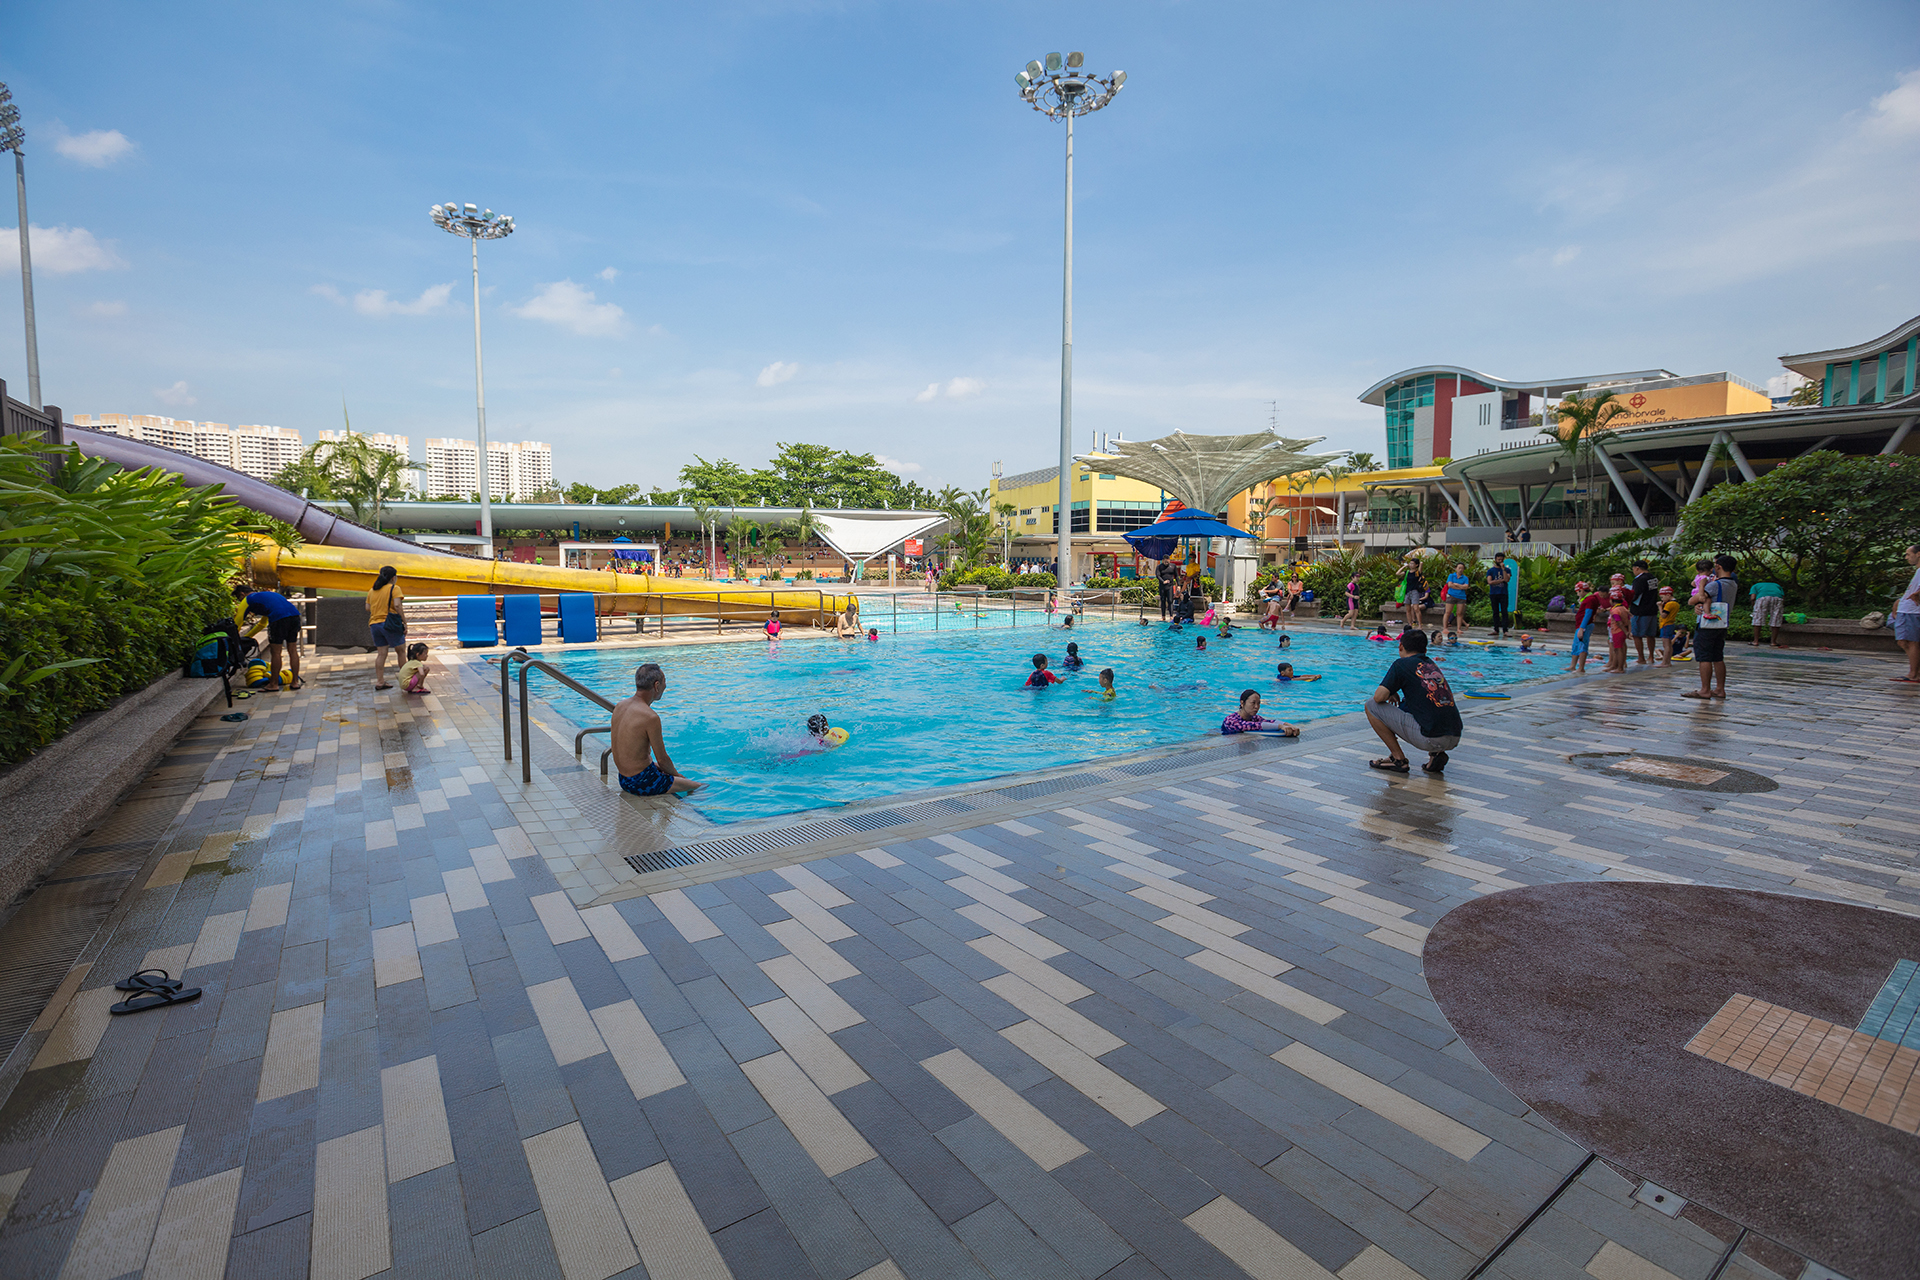 OUTDOOR TEACHING POOL FOR YOUNG CHILDREN